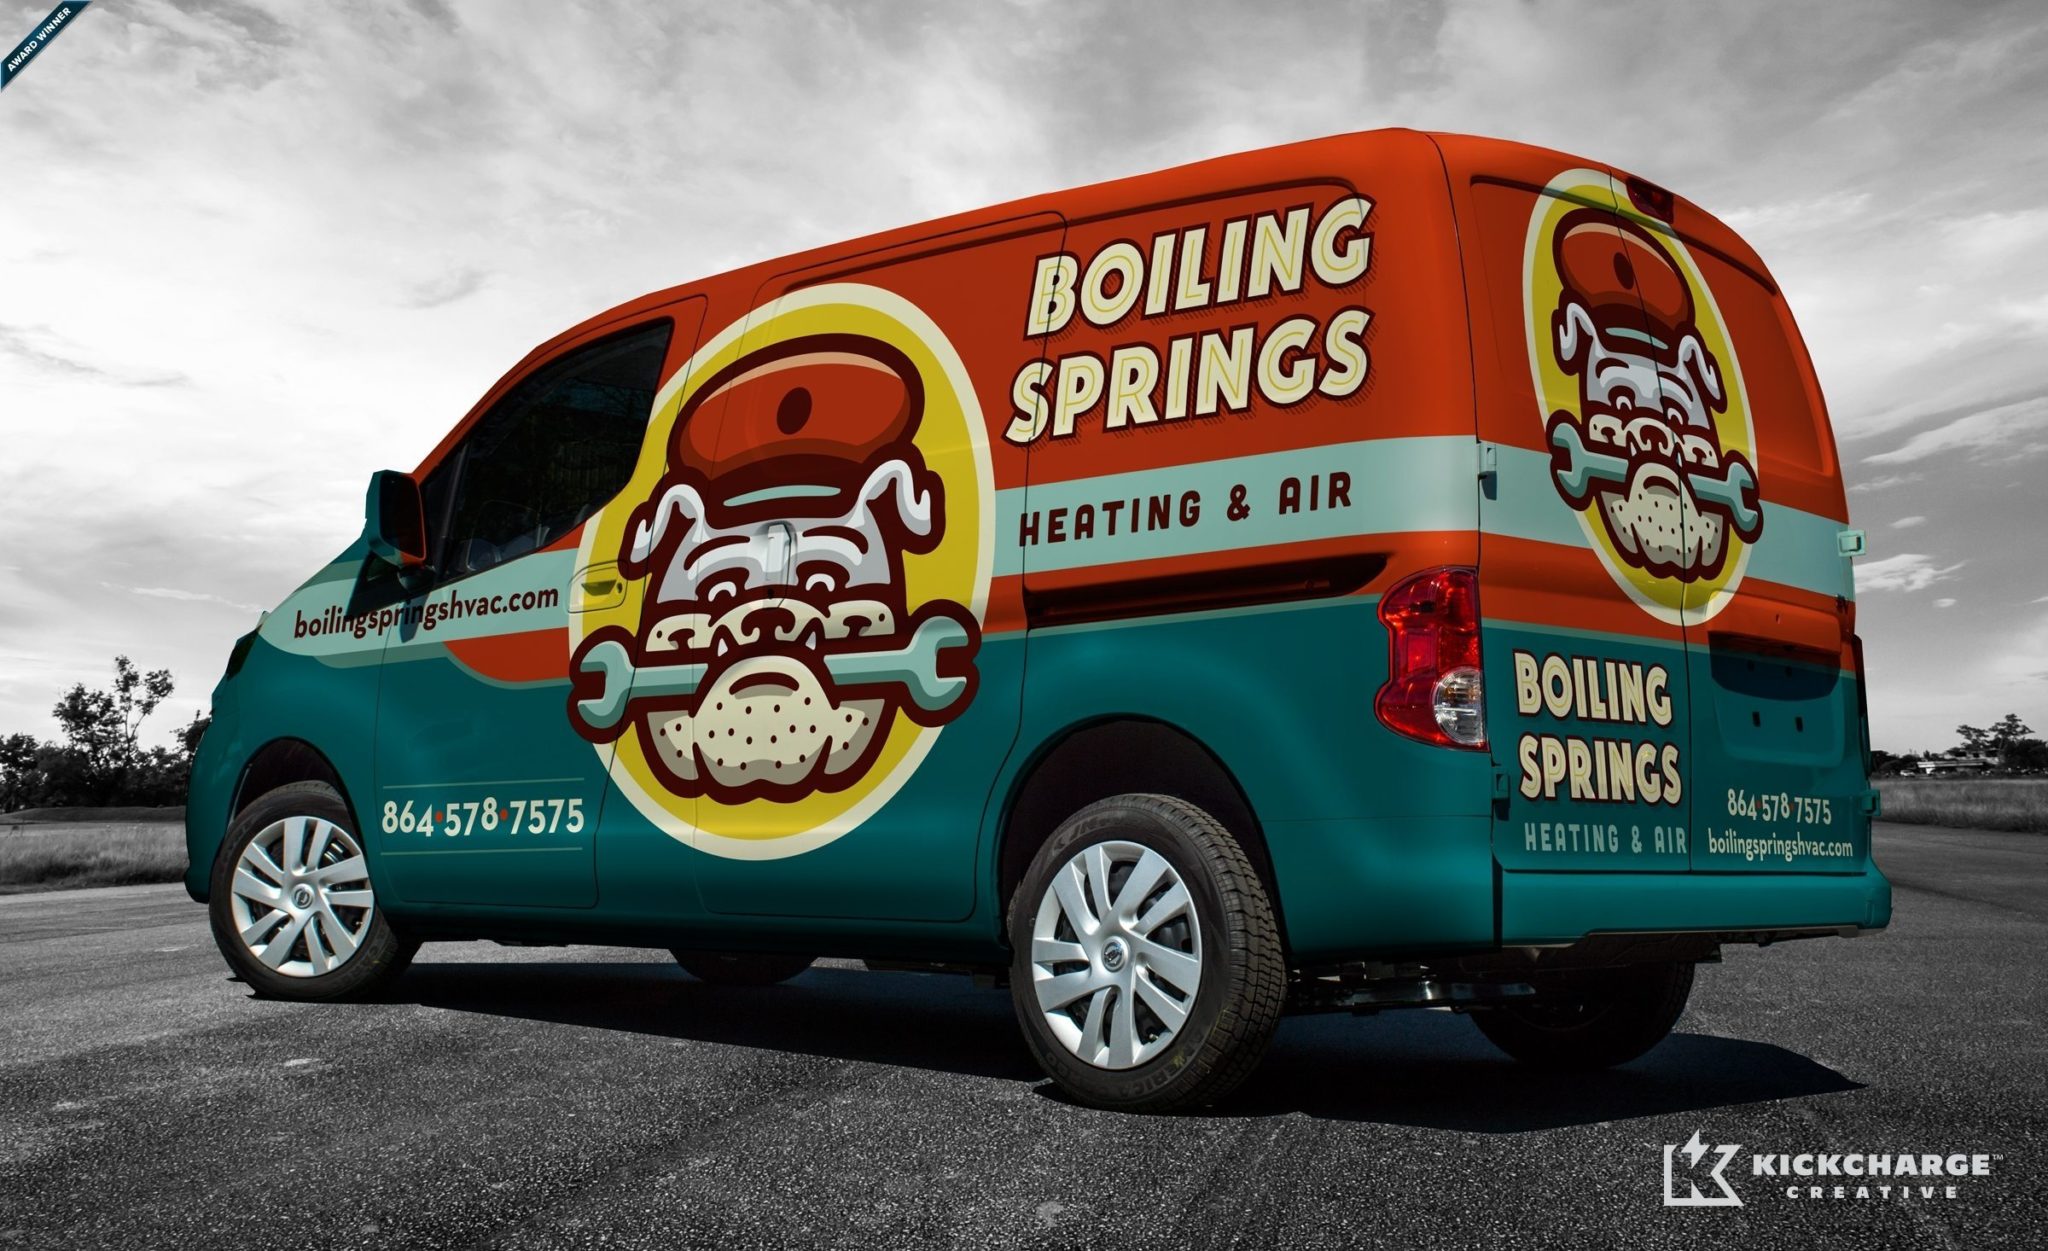 HVAC Logo design and branding for this mechanical contractor in Boiling Springs, SC integrated on their truck wrap.